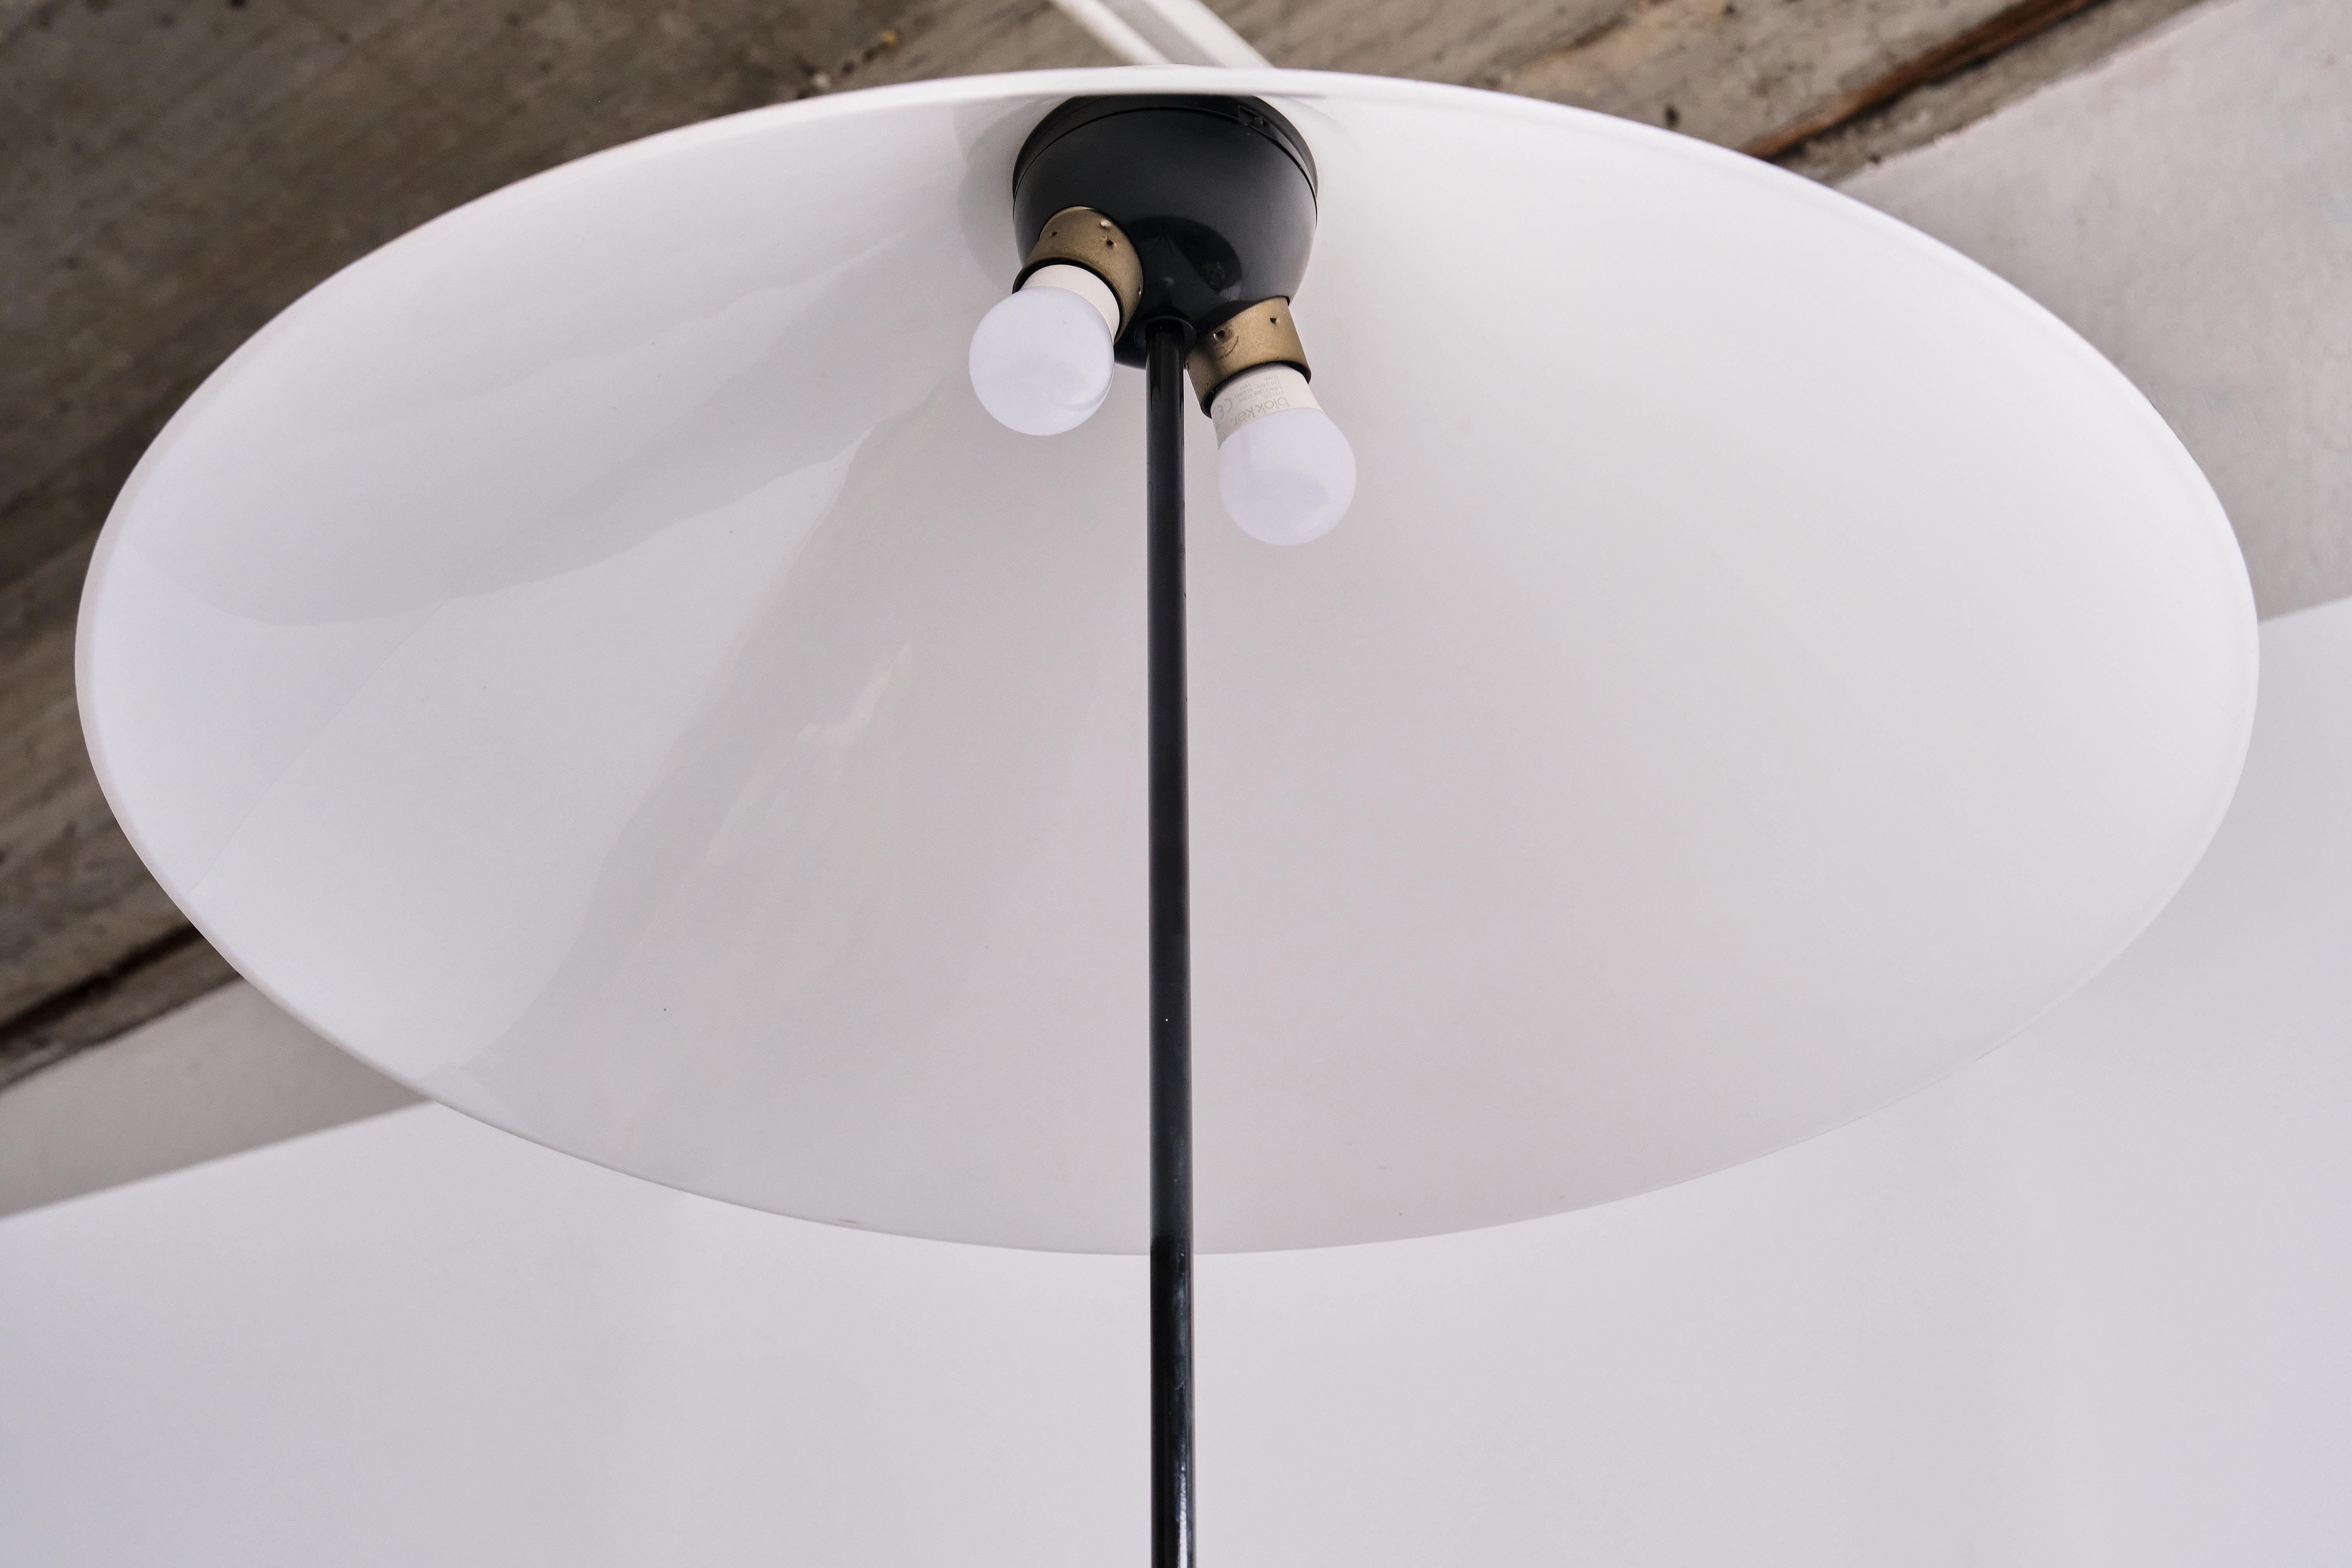 Vico Magistretti 'Snow' Floor Lamp in Metal and Marble, Oluce, Italy, 1973 For Sale 2